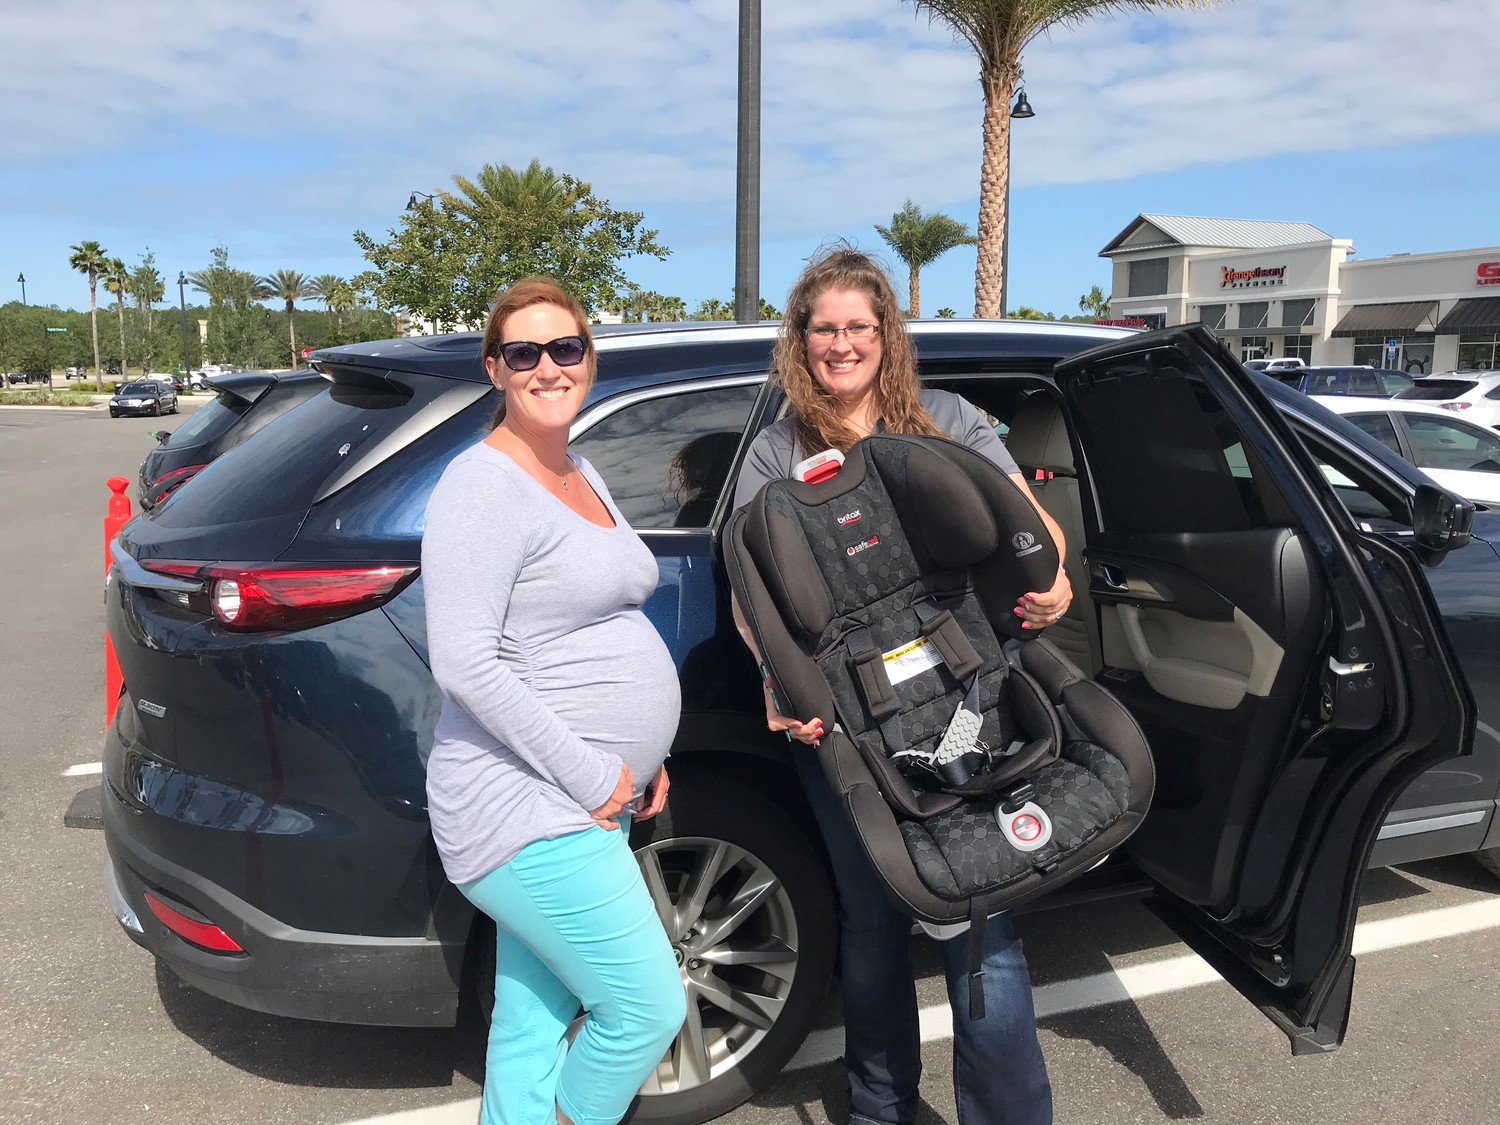 Nocatee resident Kristen Paige and St. Johns County Tax Collector Office employee Vanessa Suarez pose for a photo at the May 2 car seat safety check hosted by REMAX Unlimited.